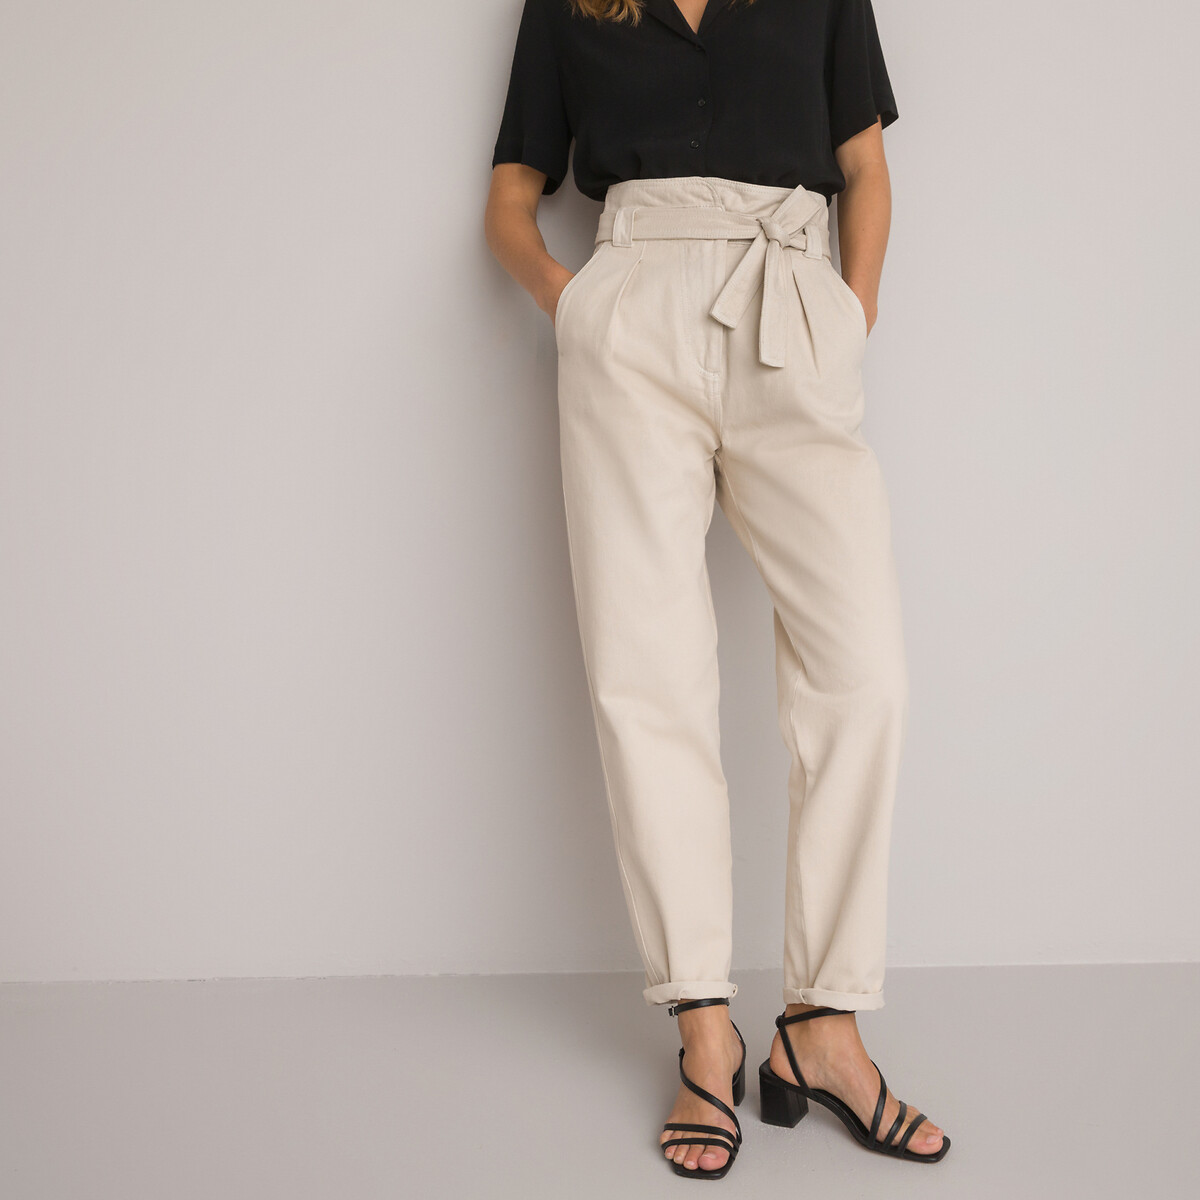 Sisley Stretch Cotton Cigarette Trousers, Blue at John Lewis & Partners